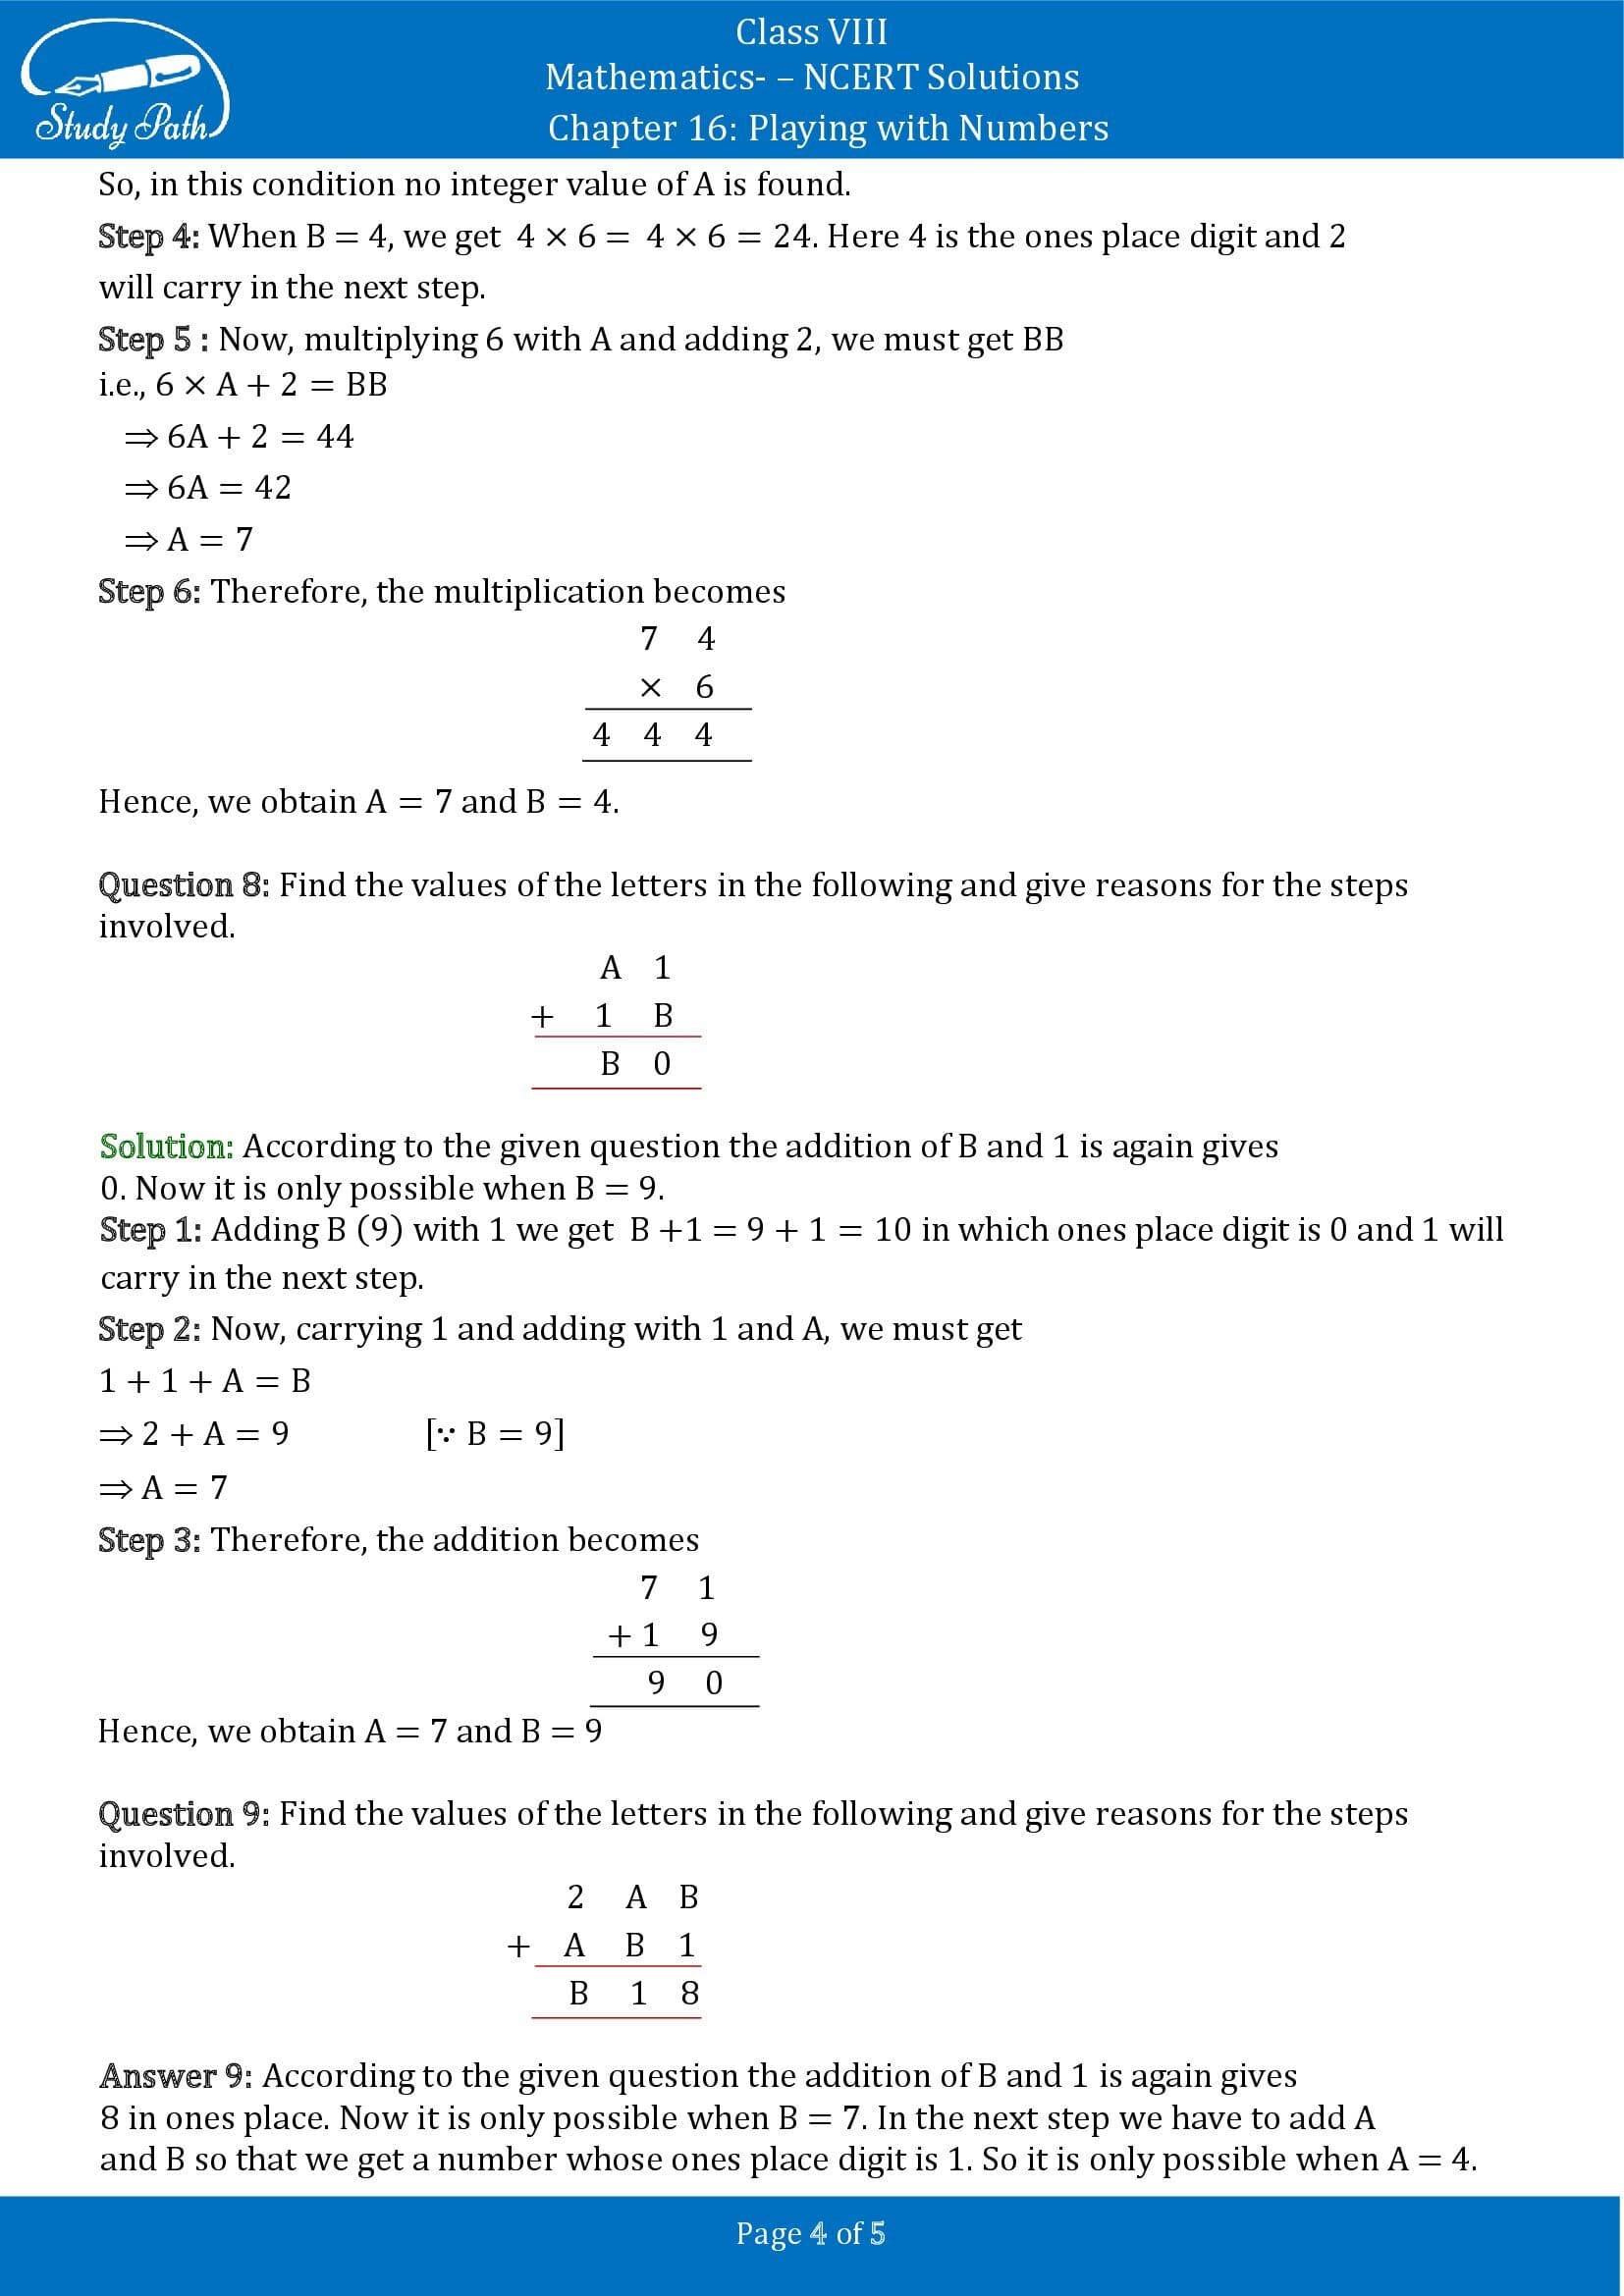 NCERT Solutions for Class 8 Maths Chapter 16 Playing with Numbers Exercise 16.1 00004